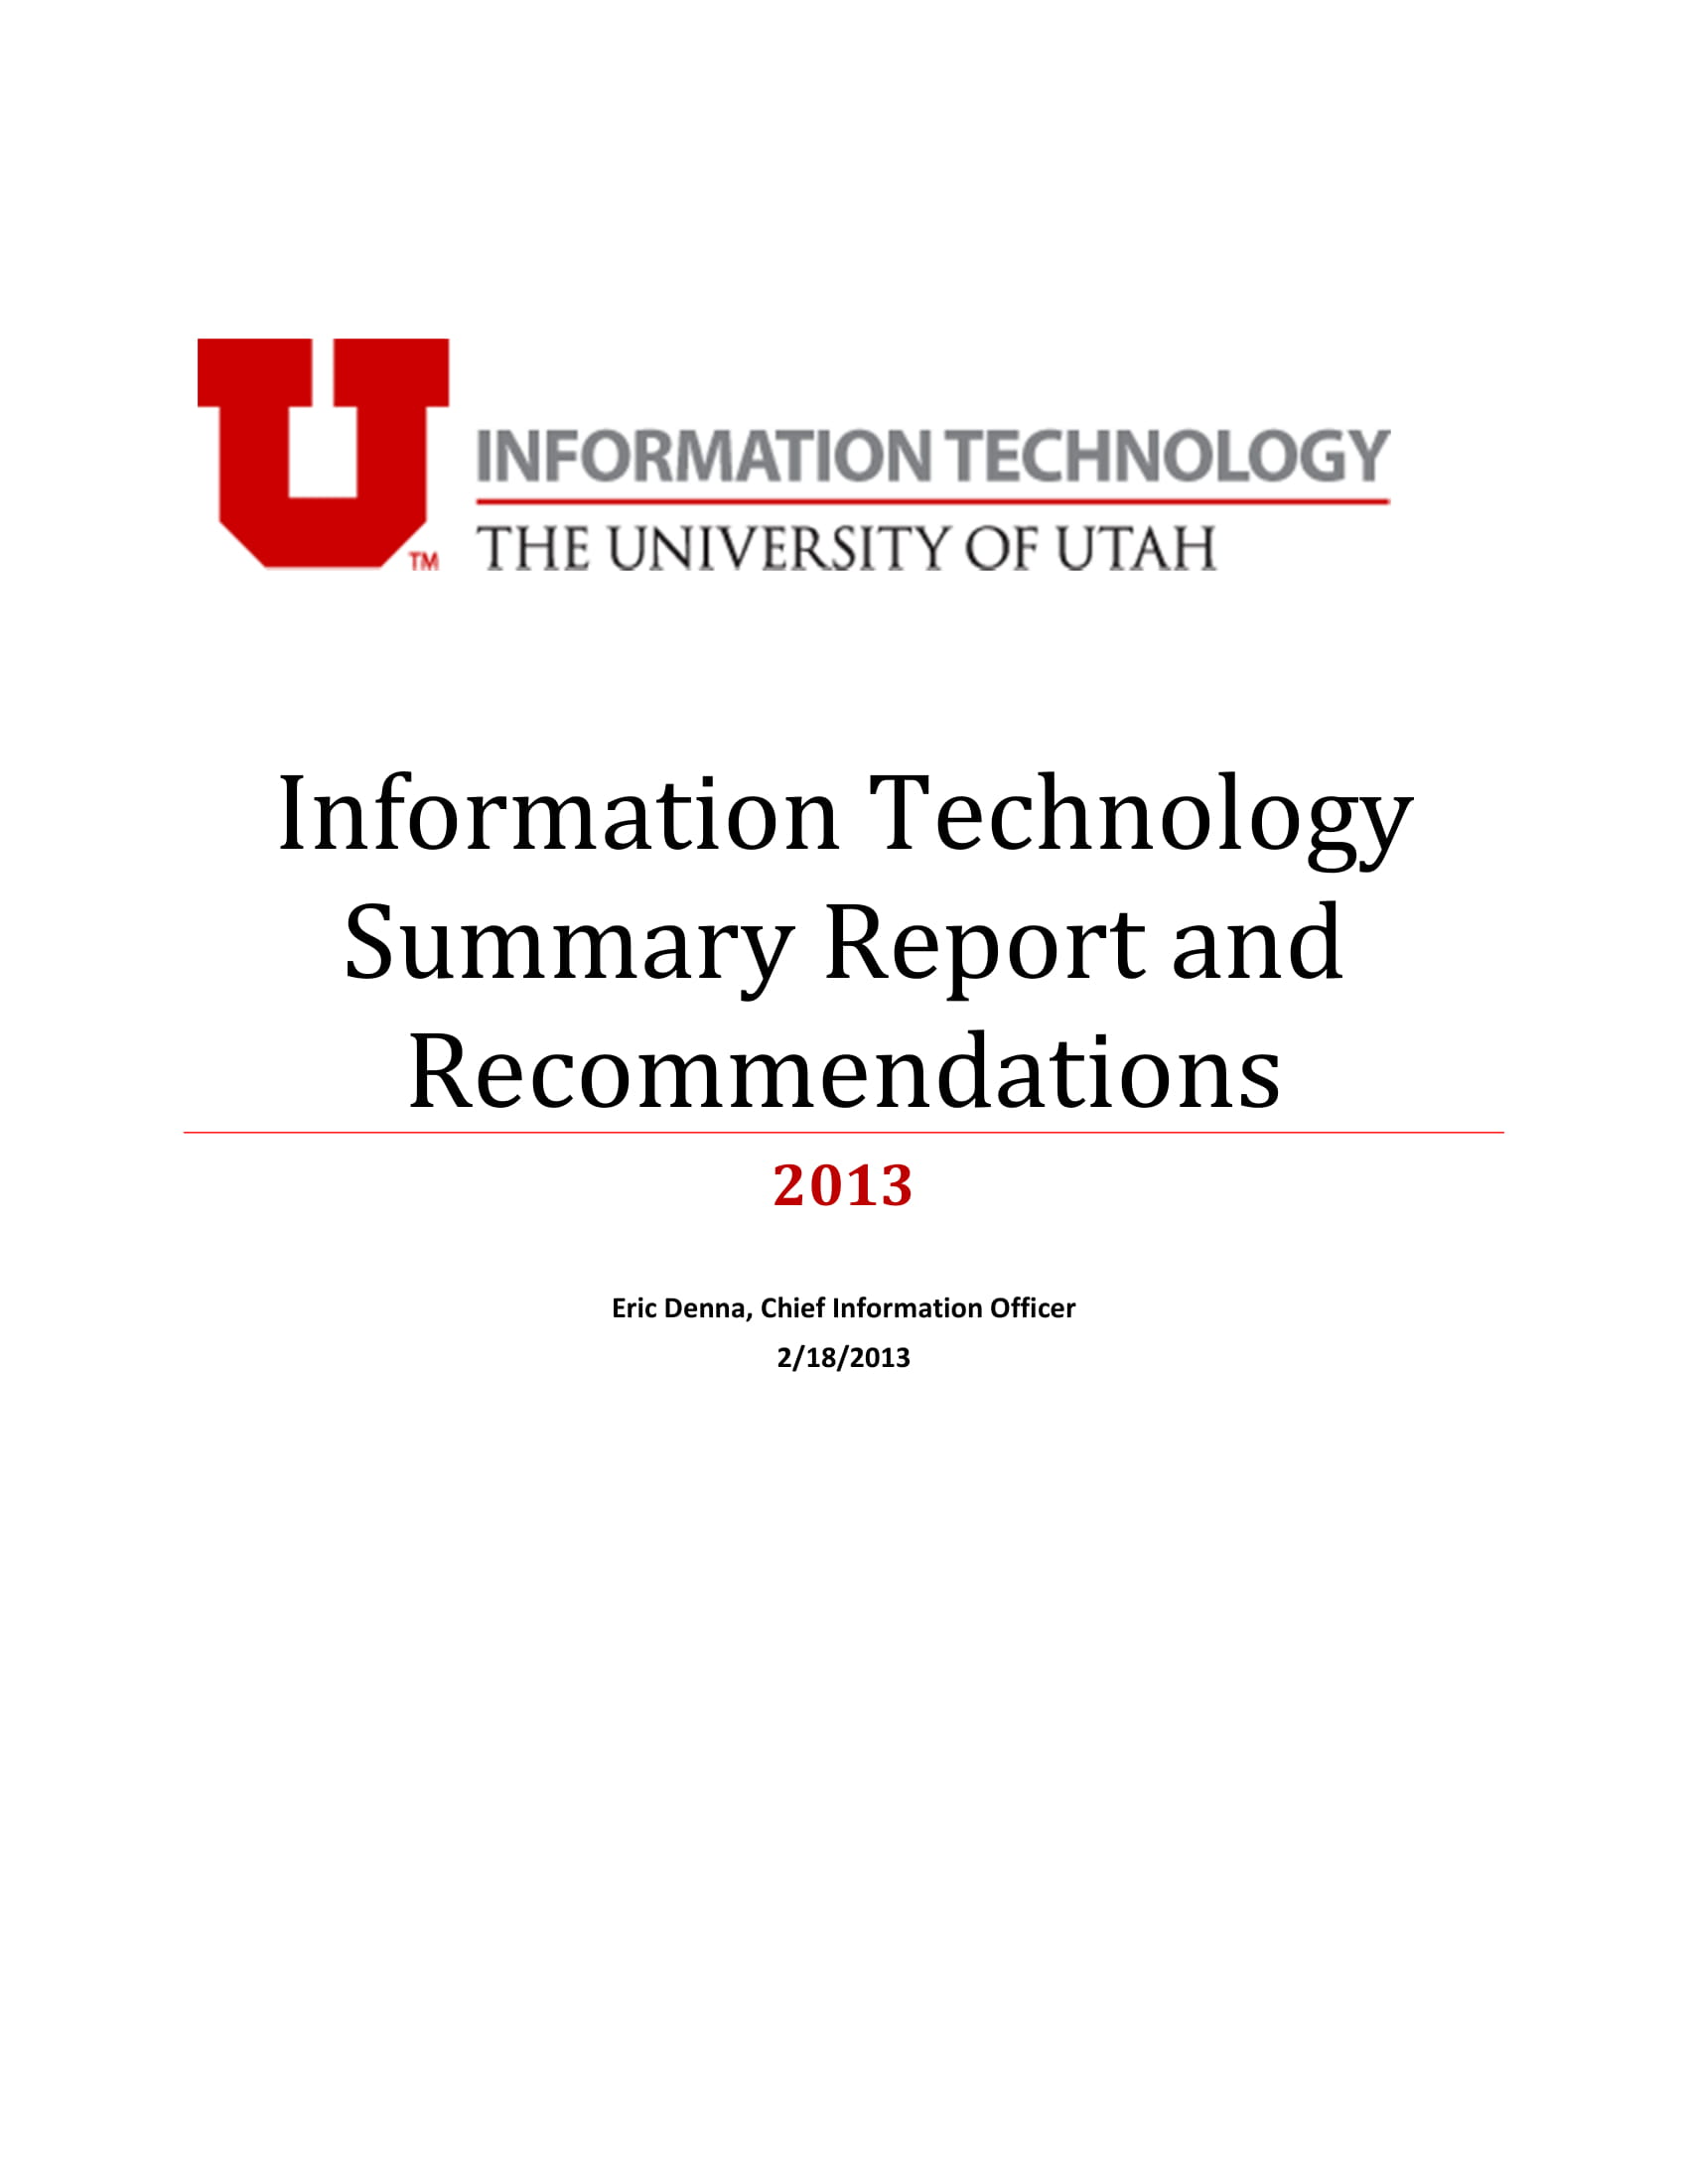 information technology summary report and management recommendations example 01